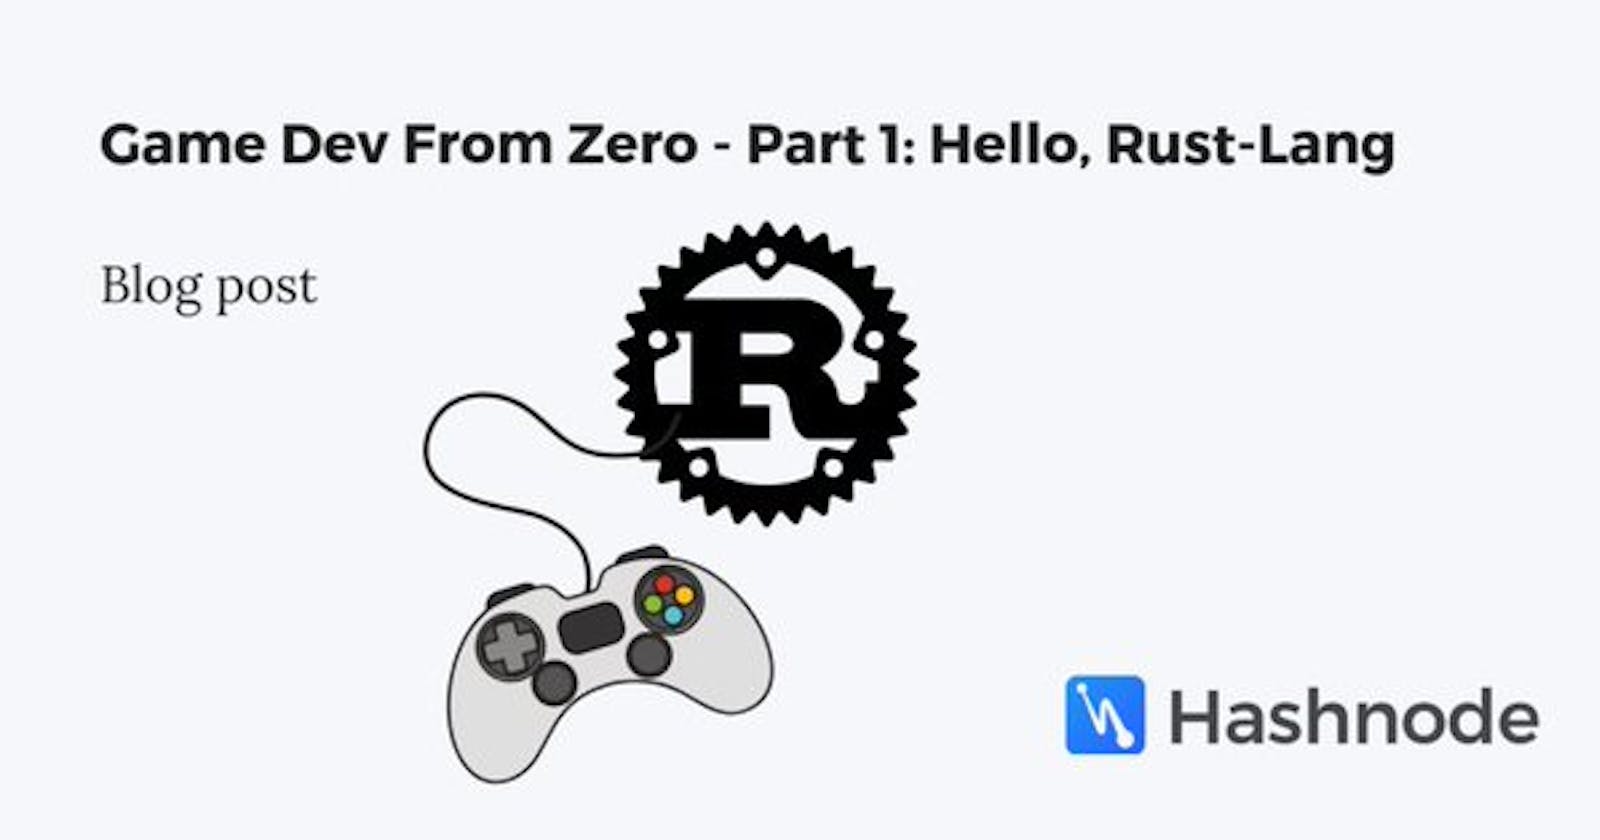 Game Dev From Zero - Part 1: Hello, Rust-Lang